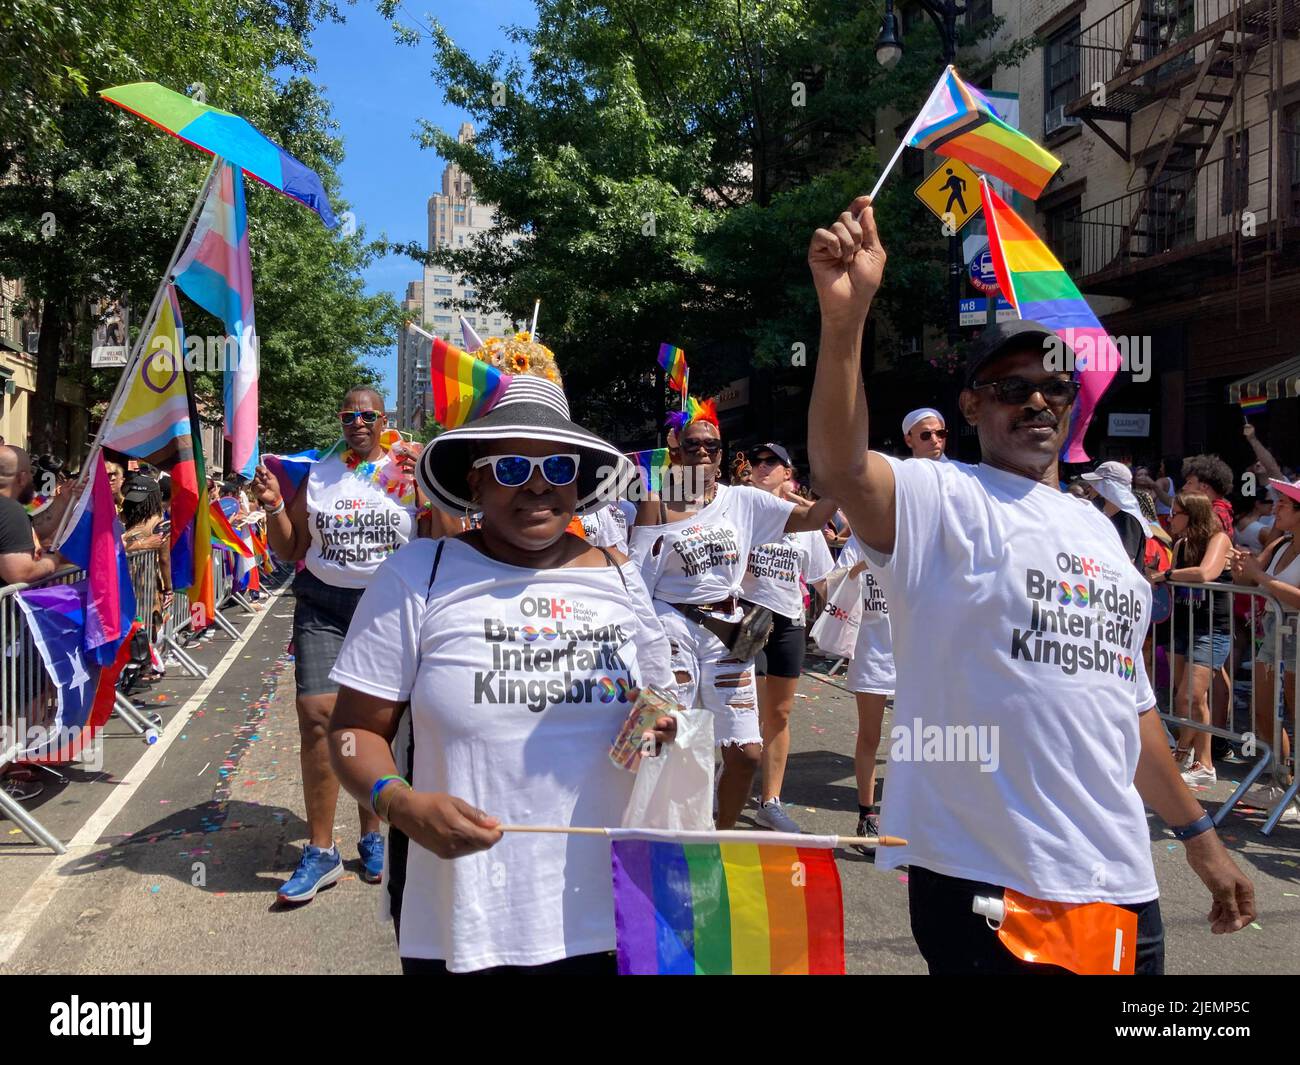 Workers and supporters of Brookdale Interfaith Kingsbrook hospital the Gay Pride Parade in New York on Sunday, June 26. 2022. The parade was back in full force after being cancelled and scaled back after two years due to COVID-19 restrictions. (© Frances M. Roberts) Stock Photo